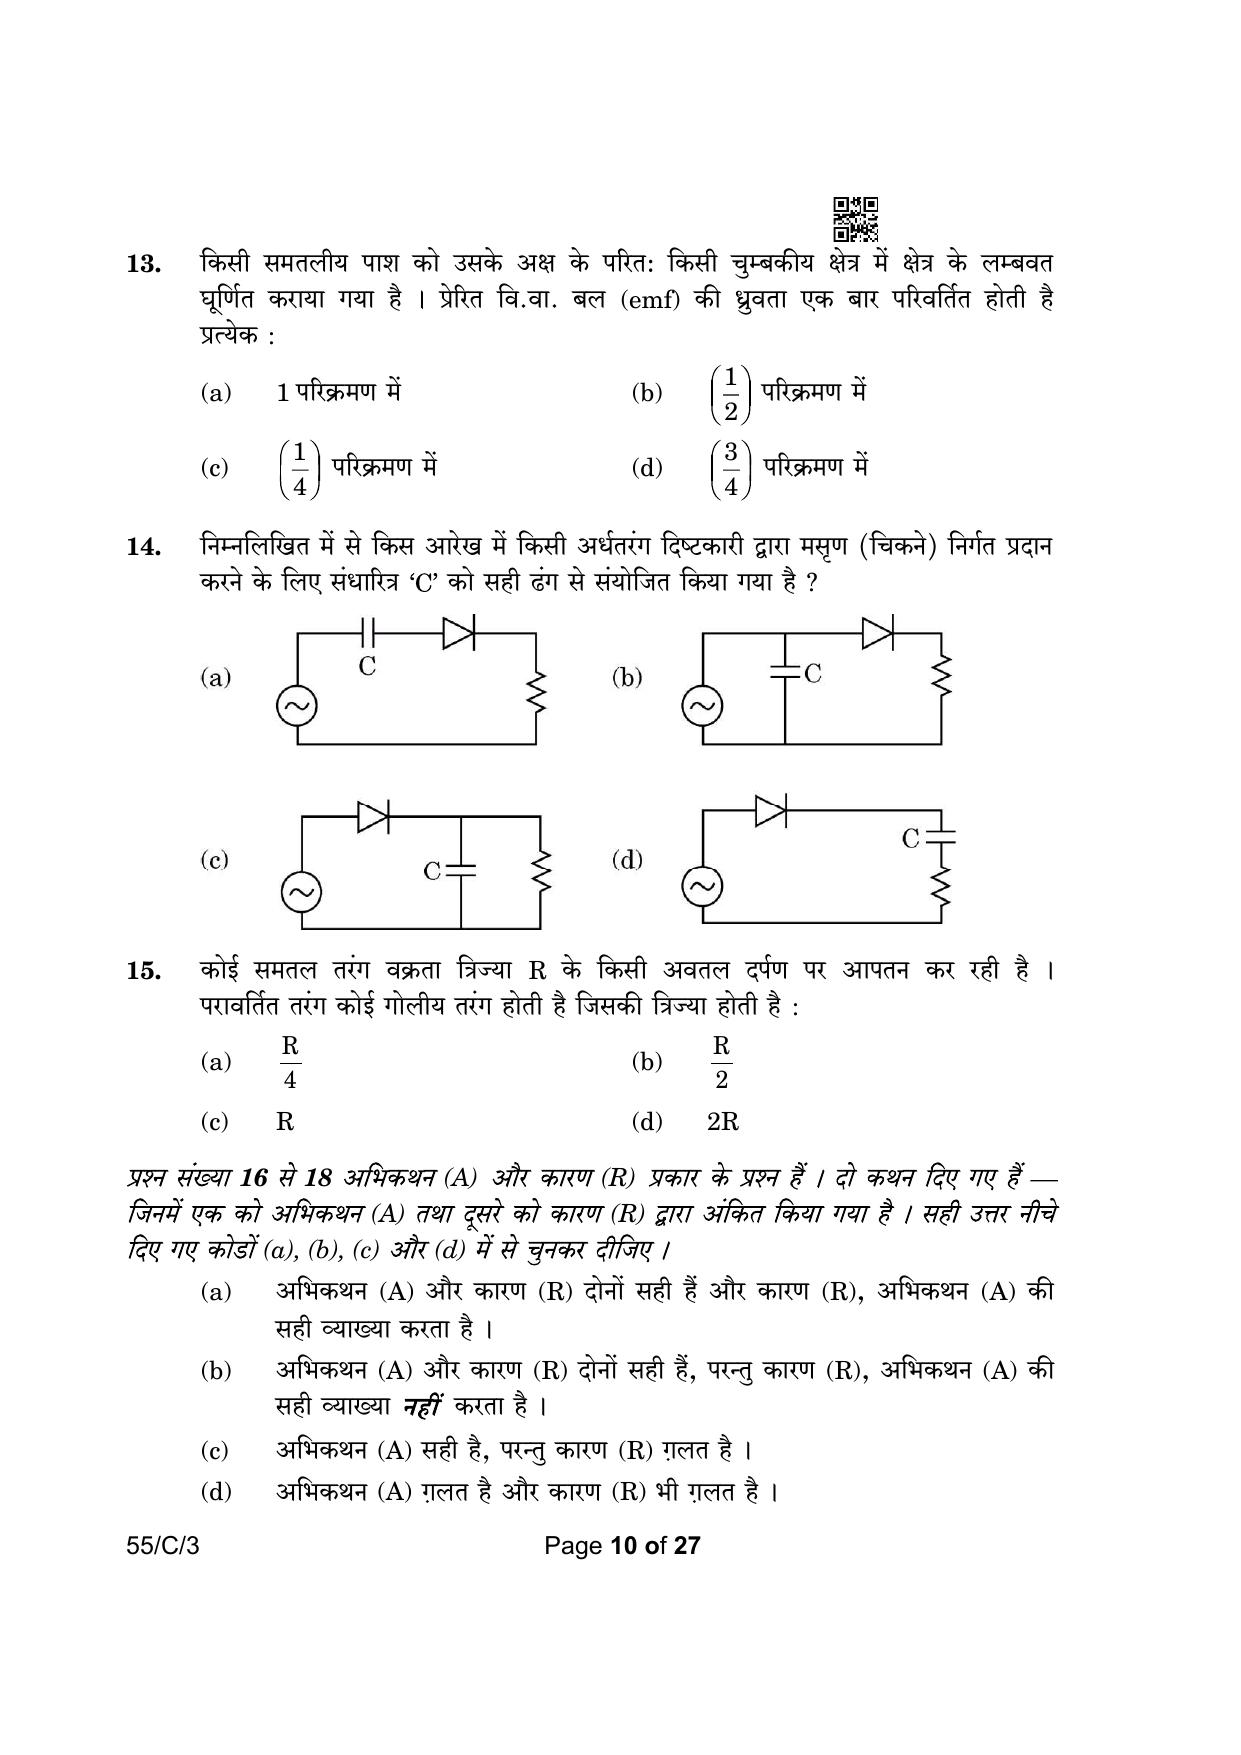 CBSE Class 12 55-3 Physics 2023 (Compartment) Question Paper - Page 10